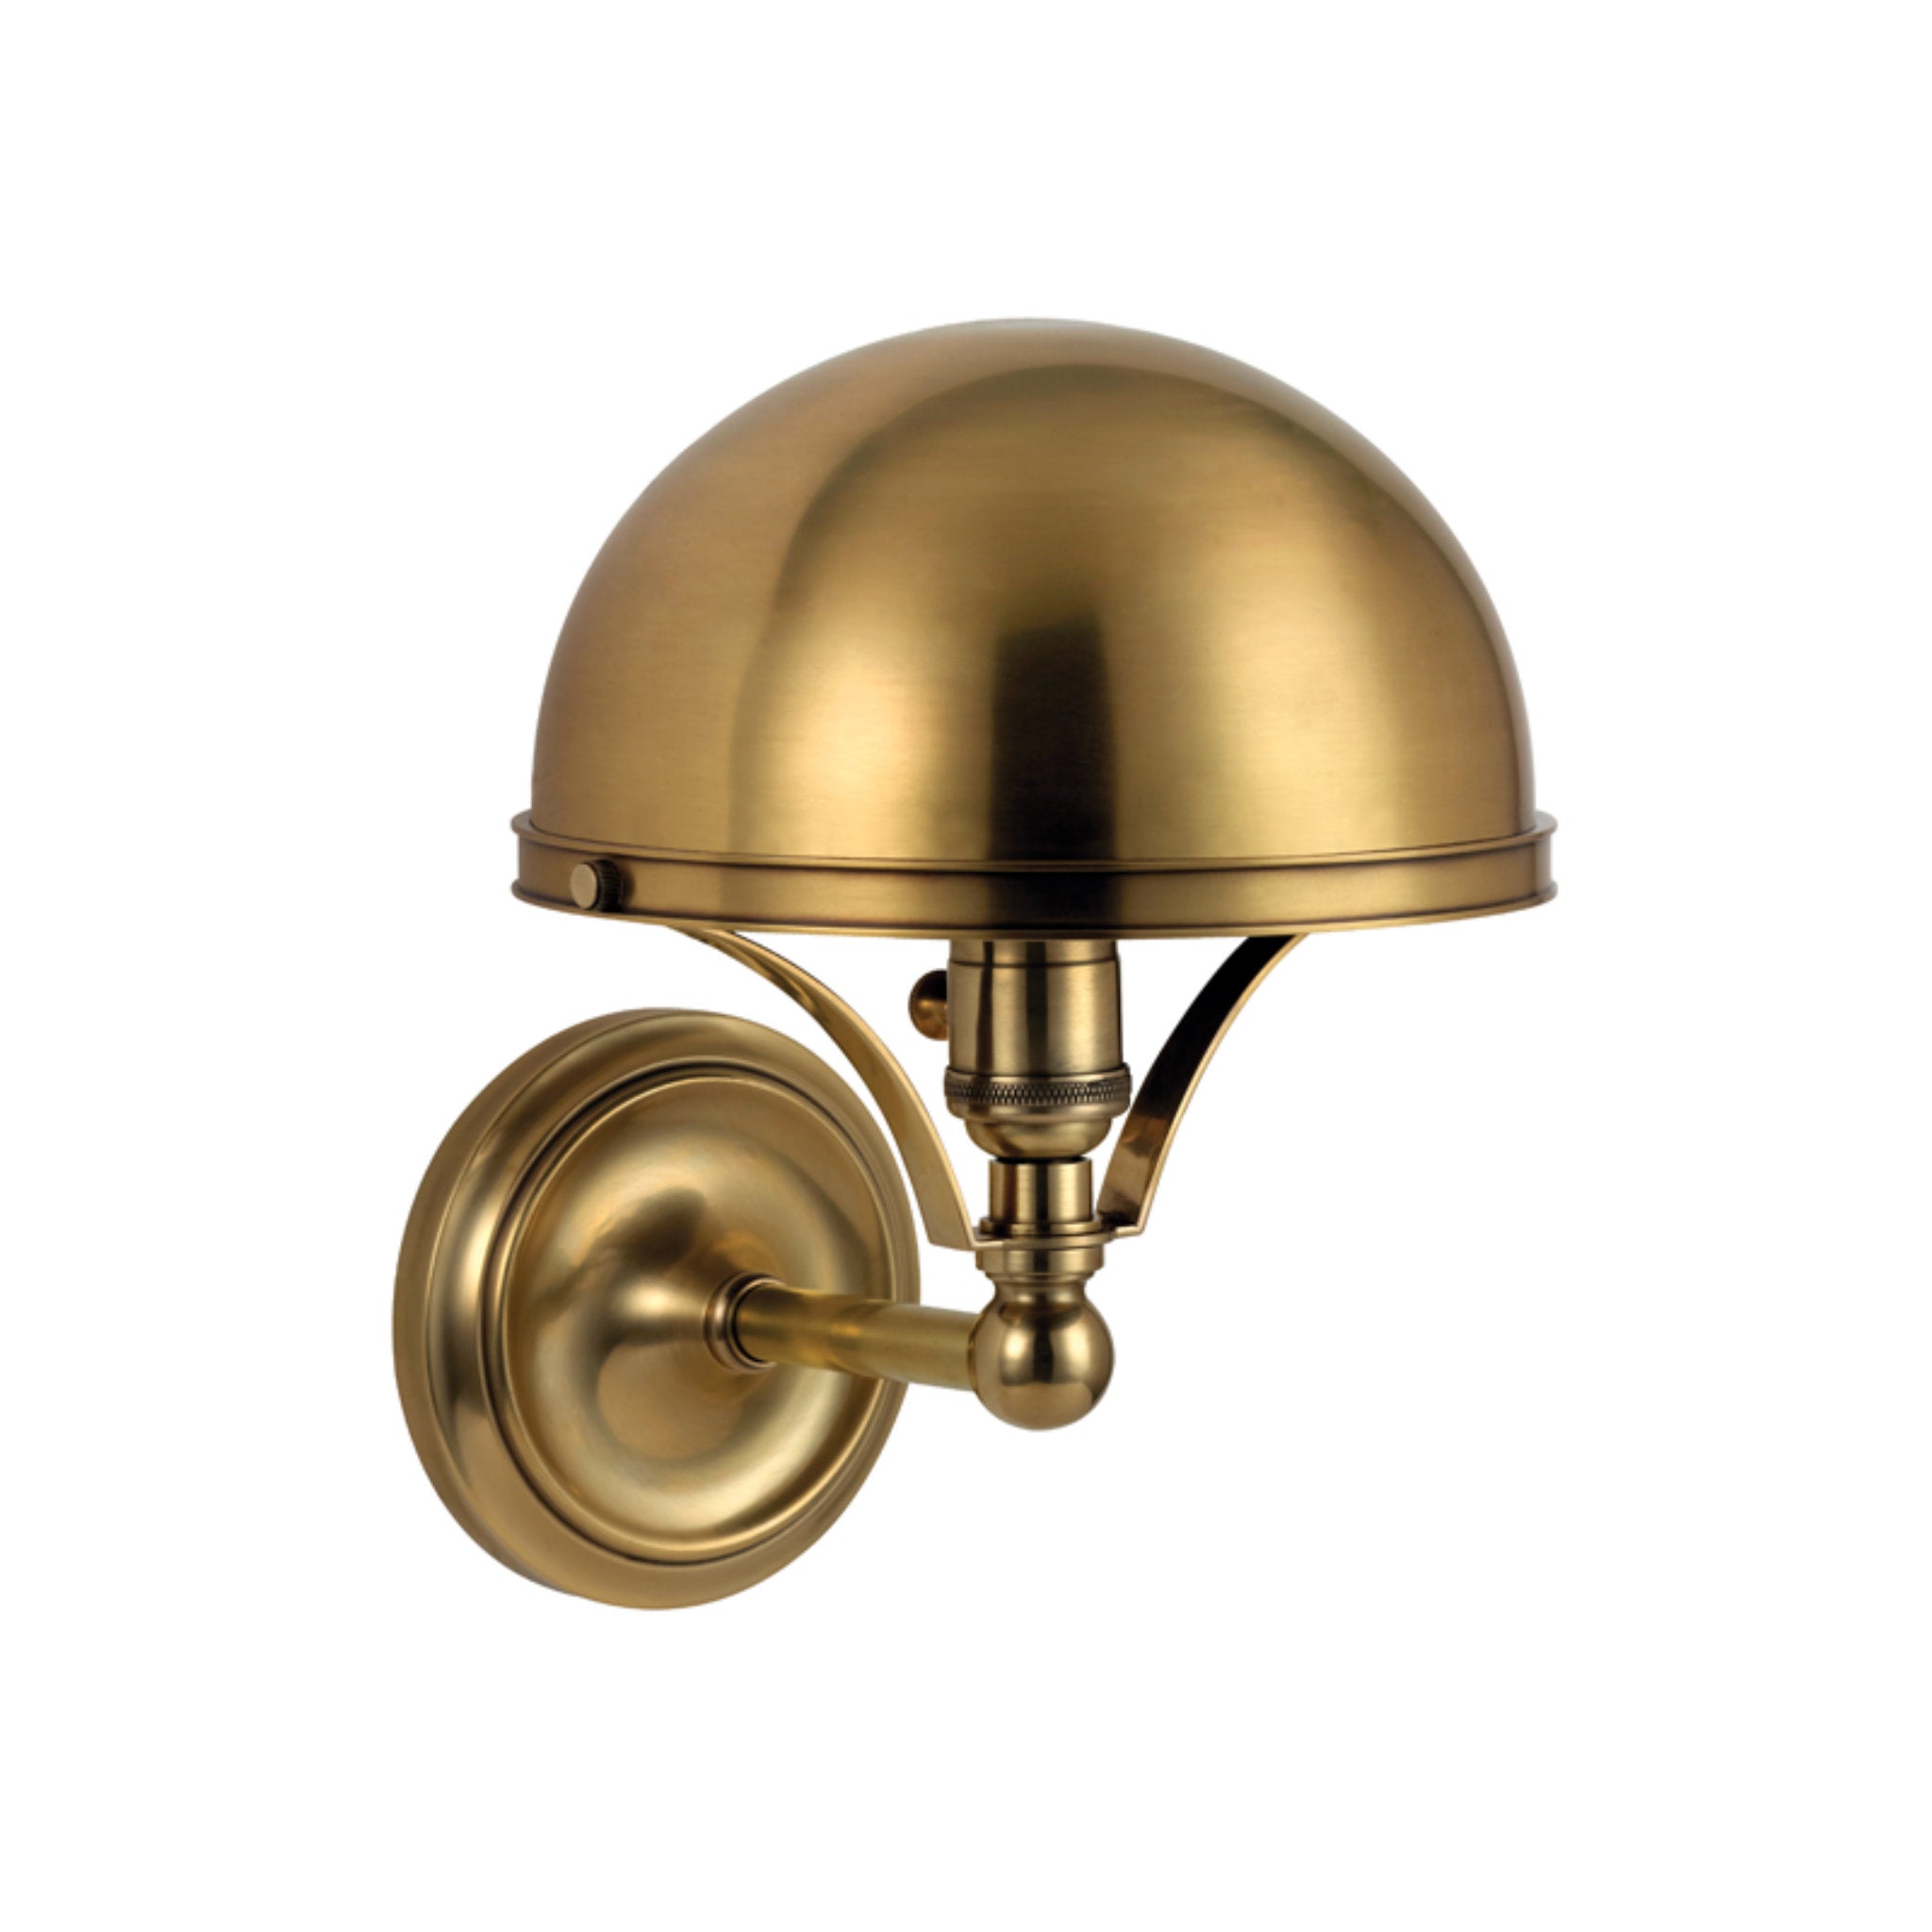 Covington 1 Light Wall Sconce in Aged Brass